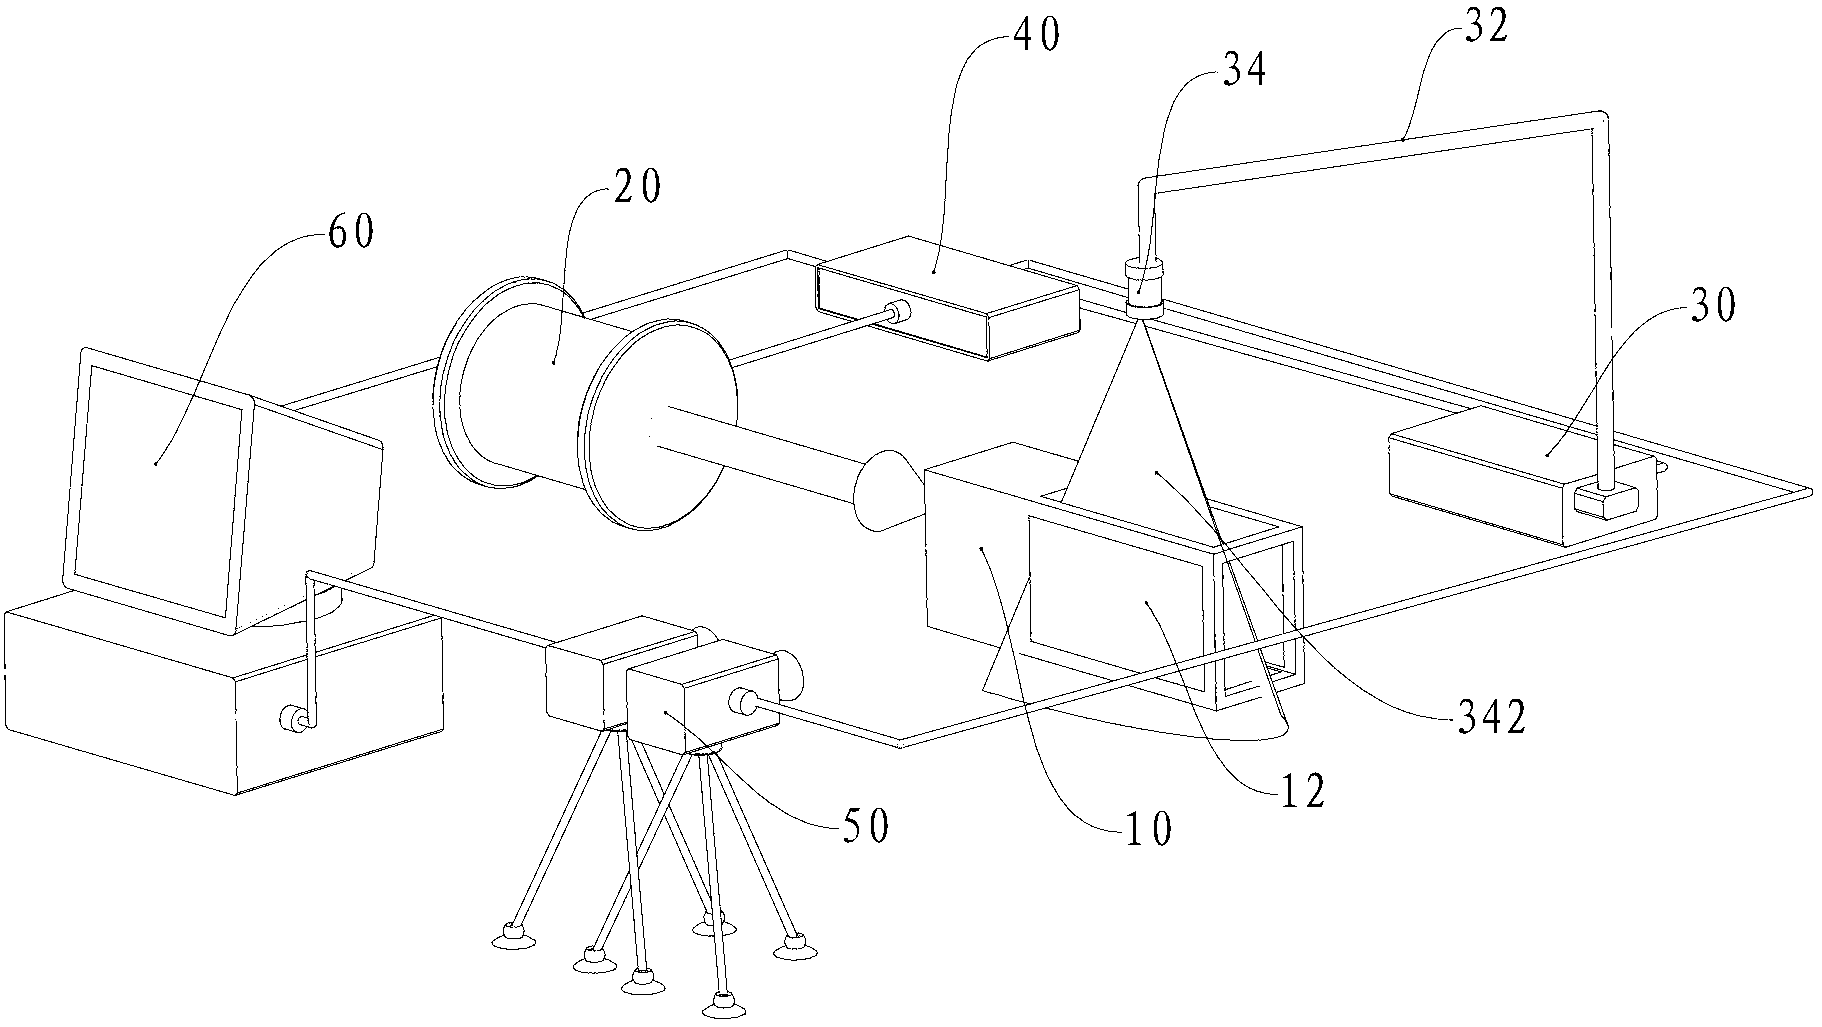 Display system and display method for NPLS (nano-tracer planar laser scattering) three-dimensional structure of supersonic flow field